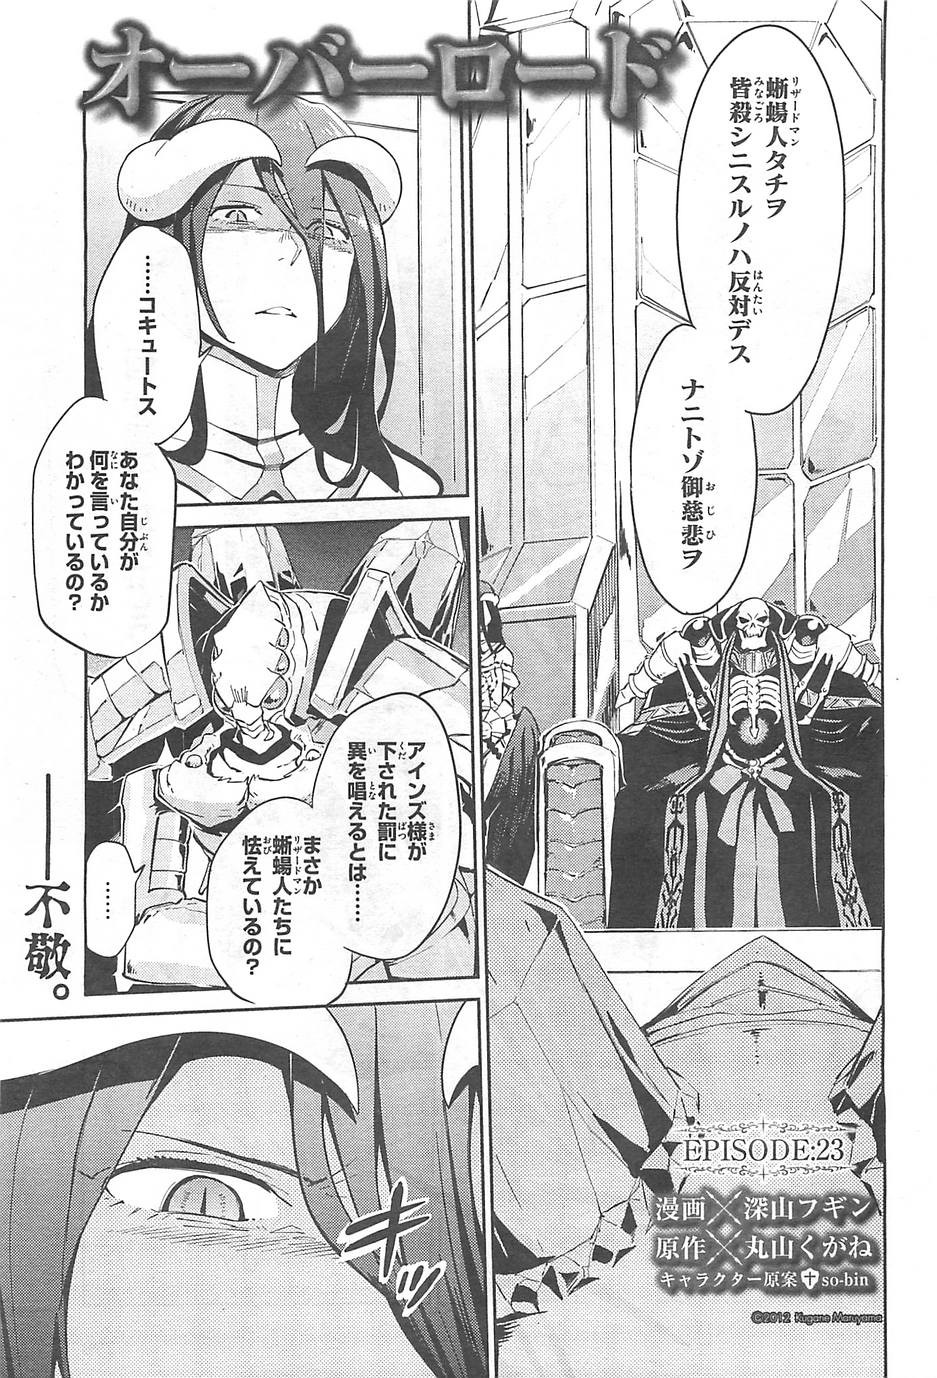 Overlord - Chapter 23 - Page 1